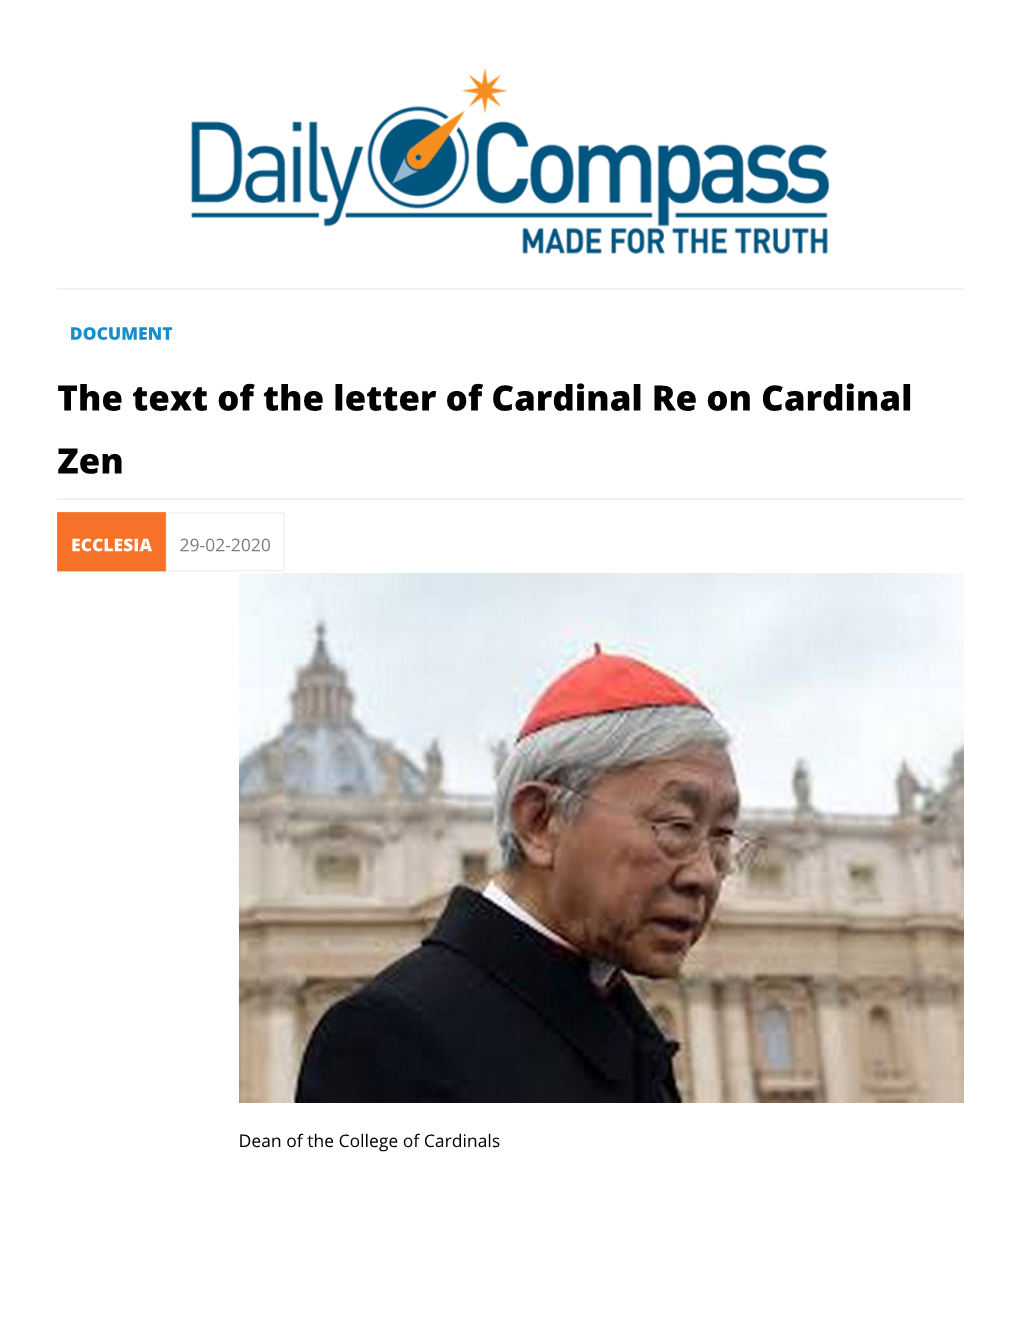 The Text of the Letter of Cardinal Re on Cardinal Zen